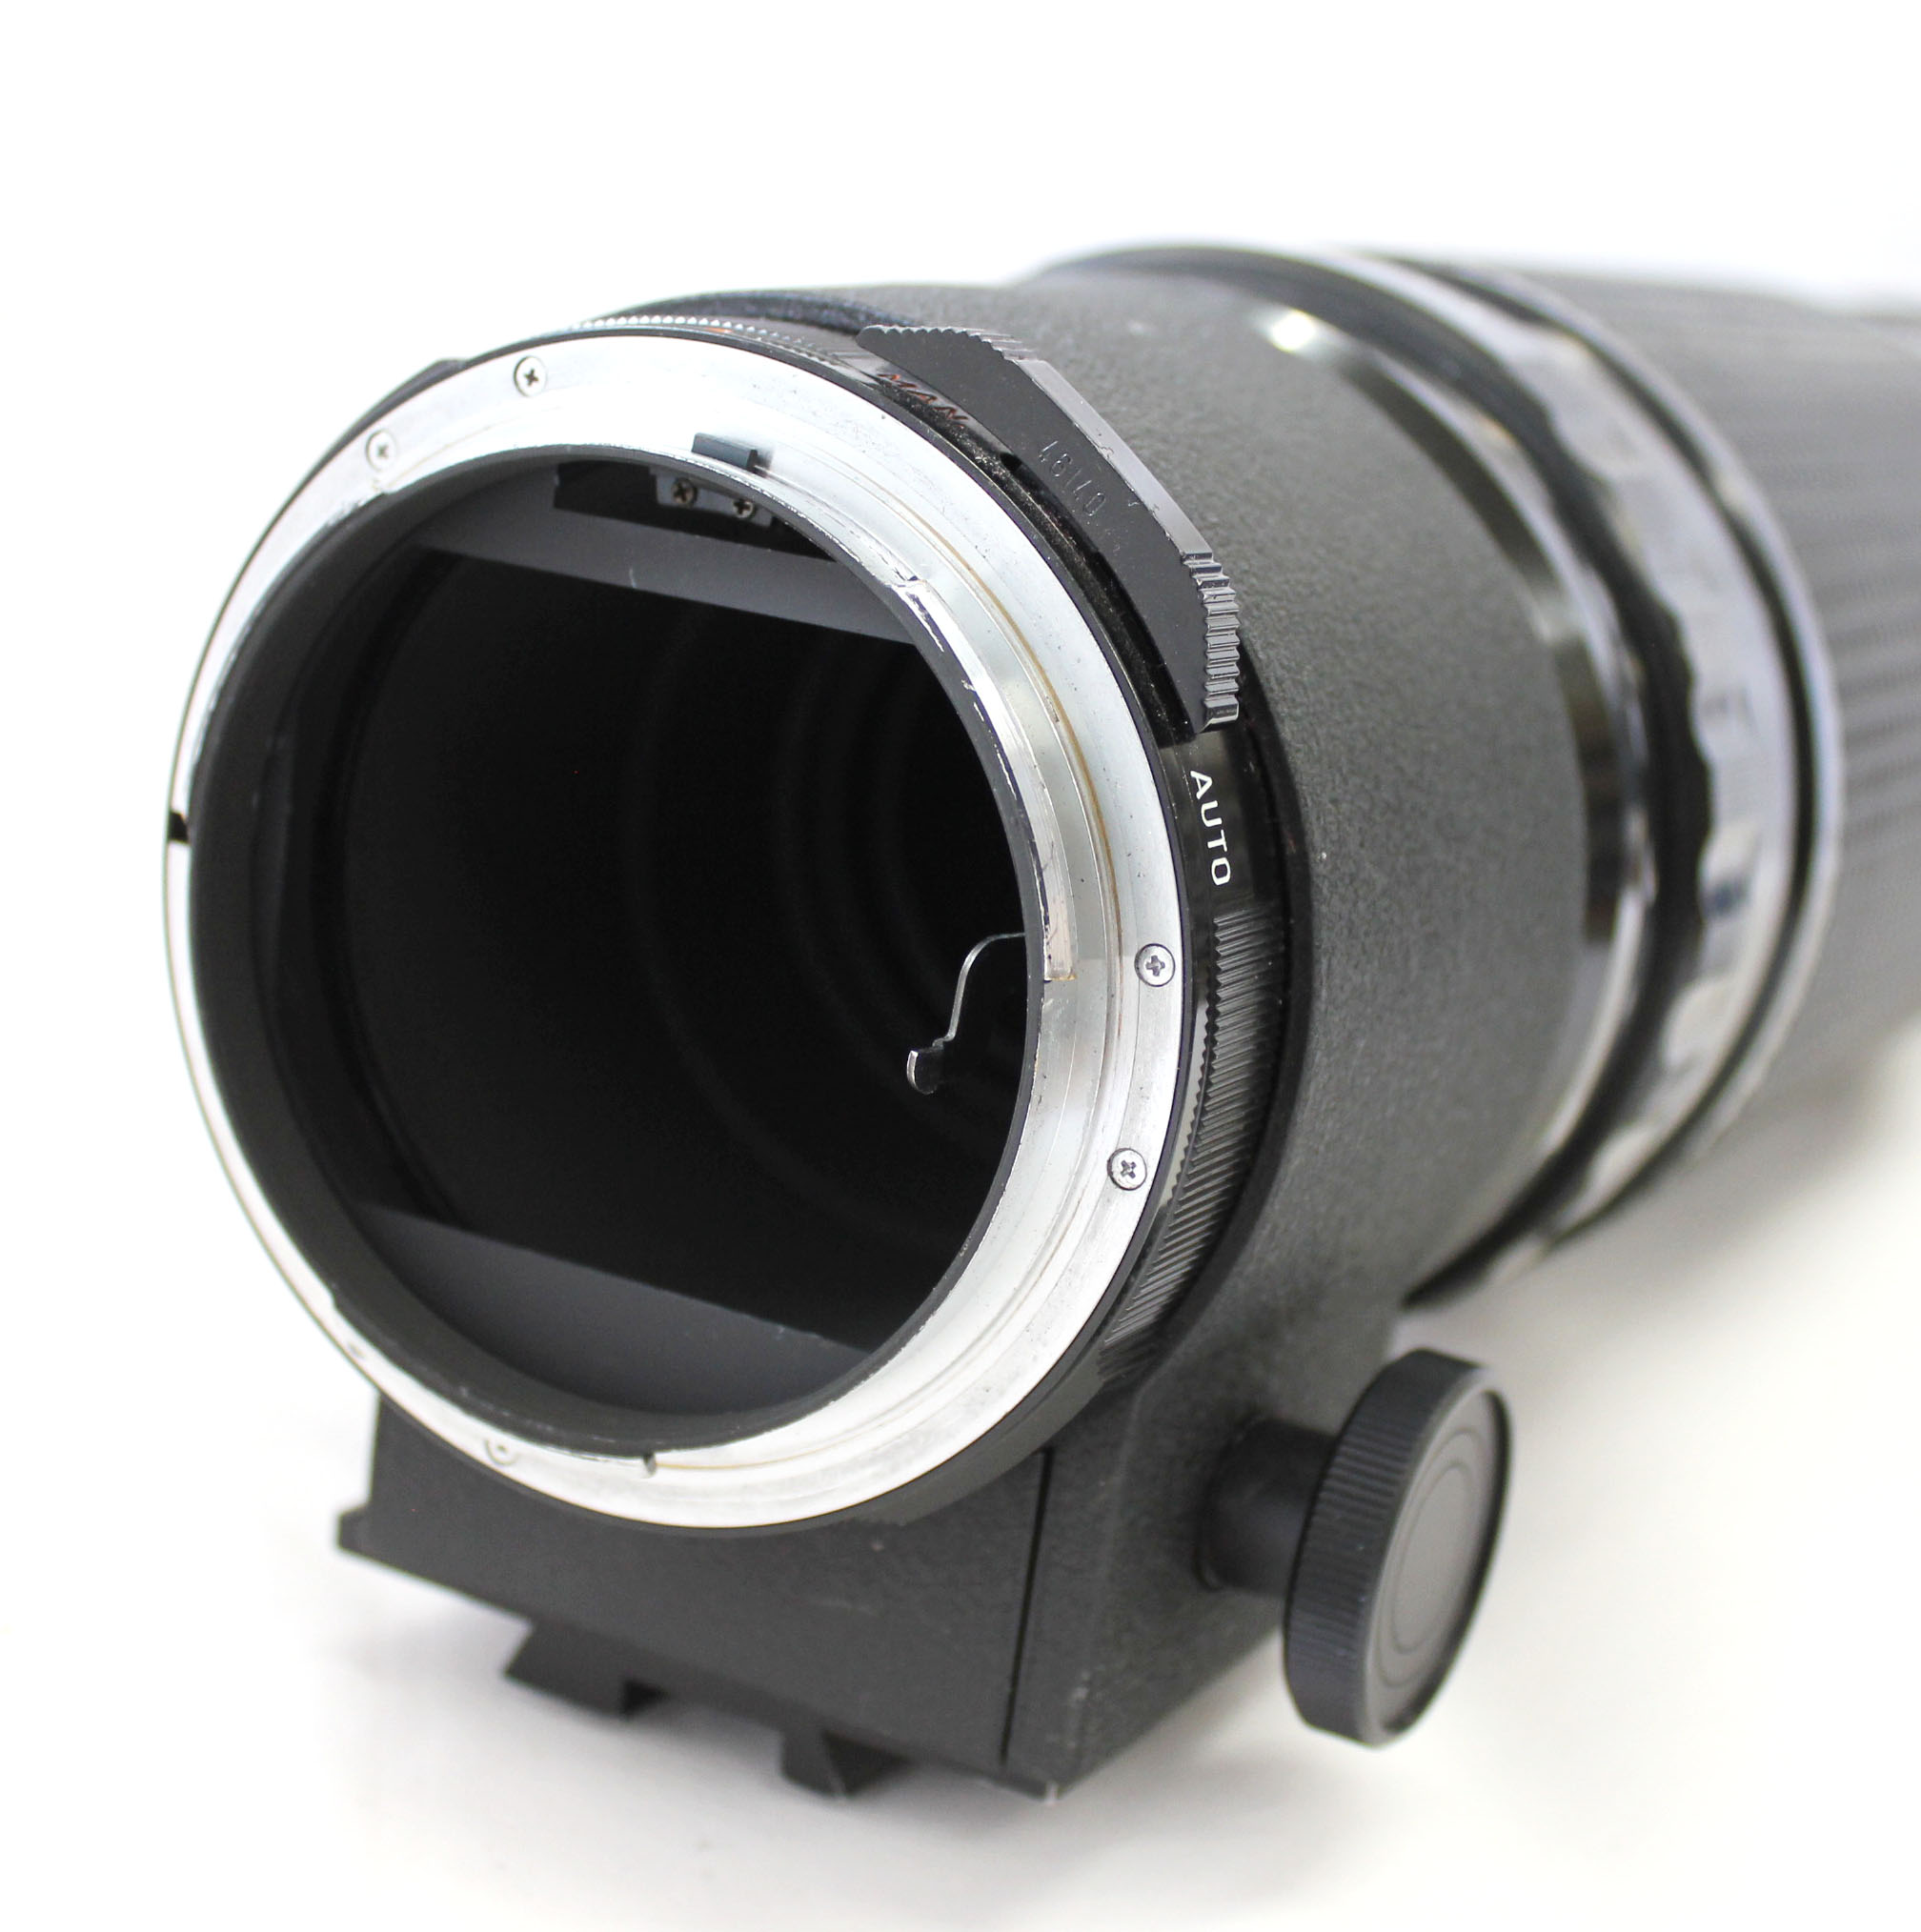  SMC PENTAX 6x7 500mm F/5.6 MF Telephoto Lens for 6x7 67 67II from Japan Photo 2